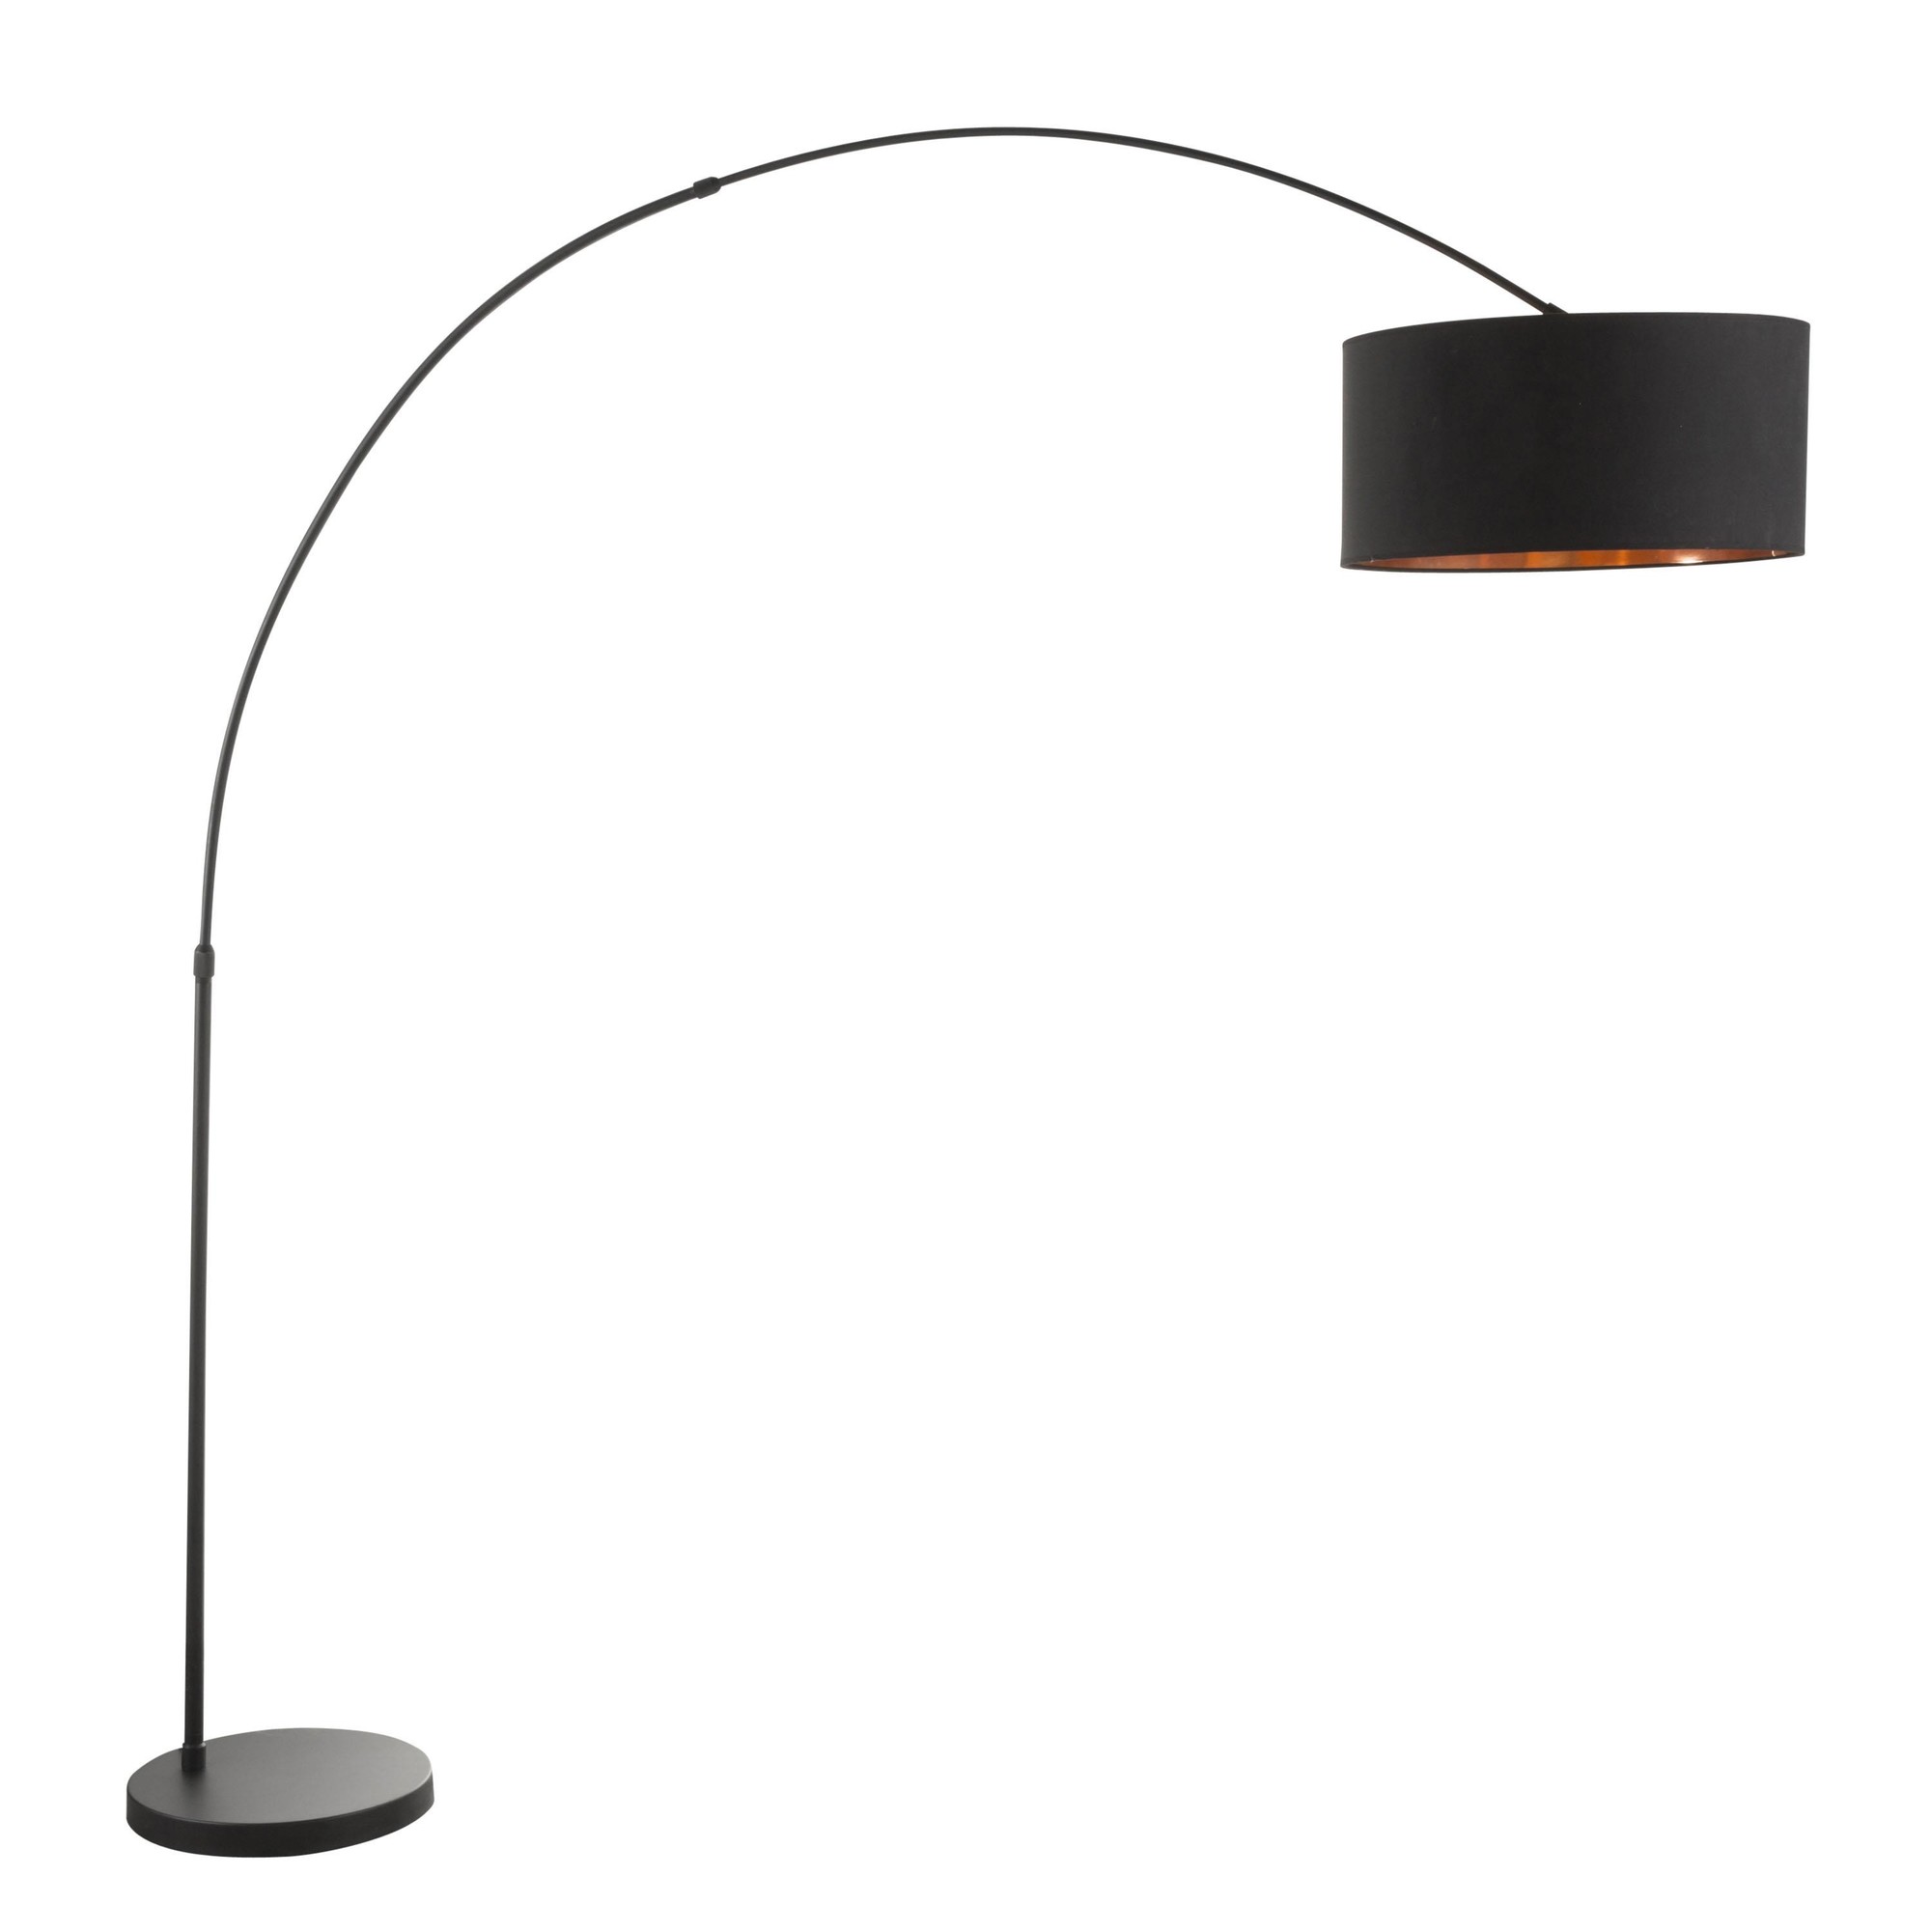 overschrijving Pigment vreemd Salon Floor Lamp - LumiSource - Stylish Decor at Affordable Prices